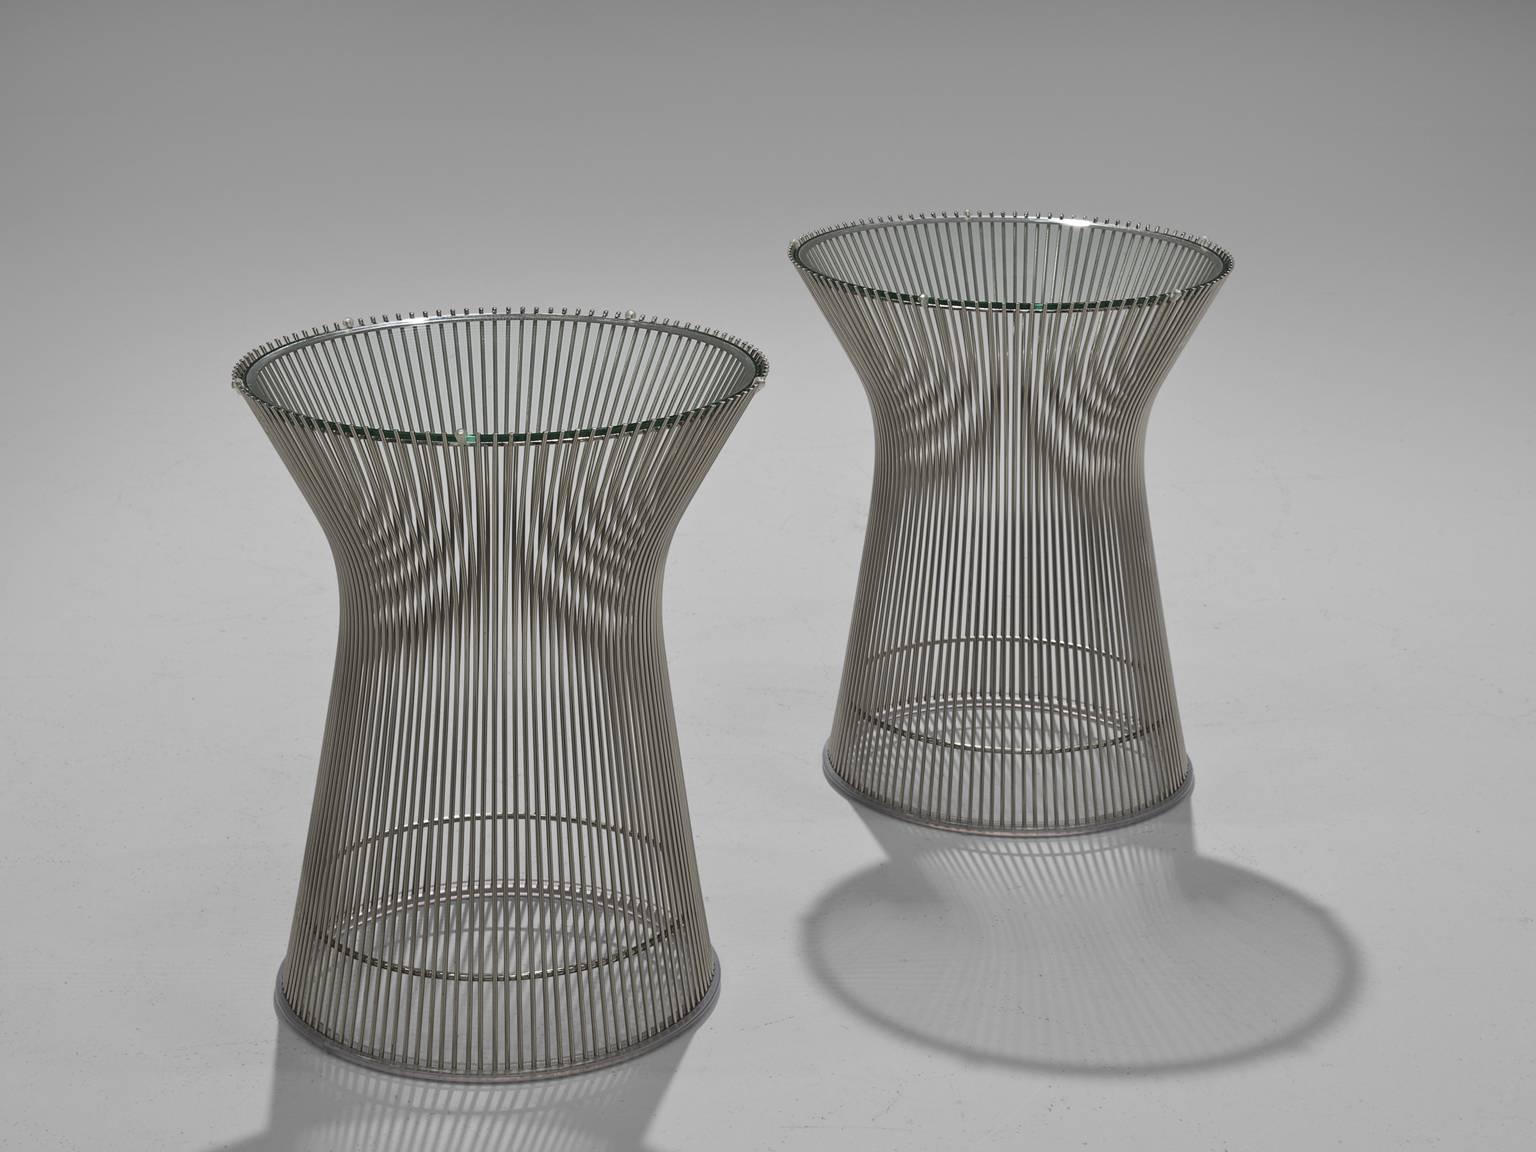 Warren Platner for Knoll, table, glass and metal, 1966, United States. 

These iconic side tables by Warren Platner (1919-2006) are created by welding curved steel rods to circular and semi-circular frames, simultaneously serving as structure and